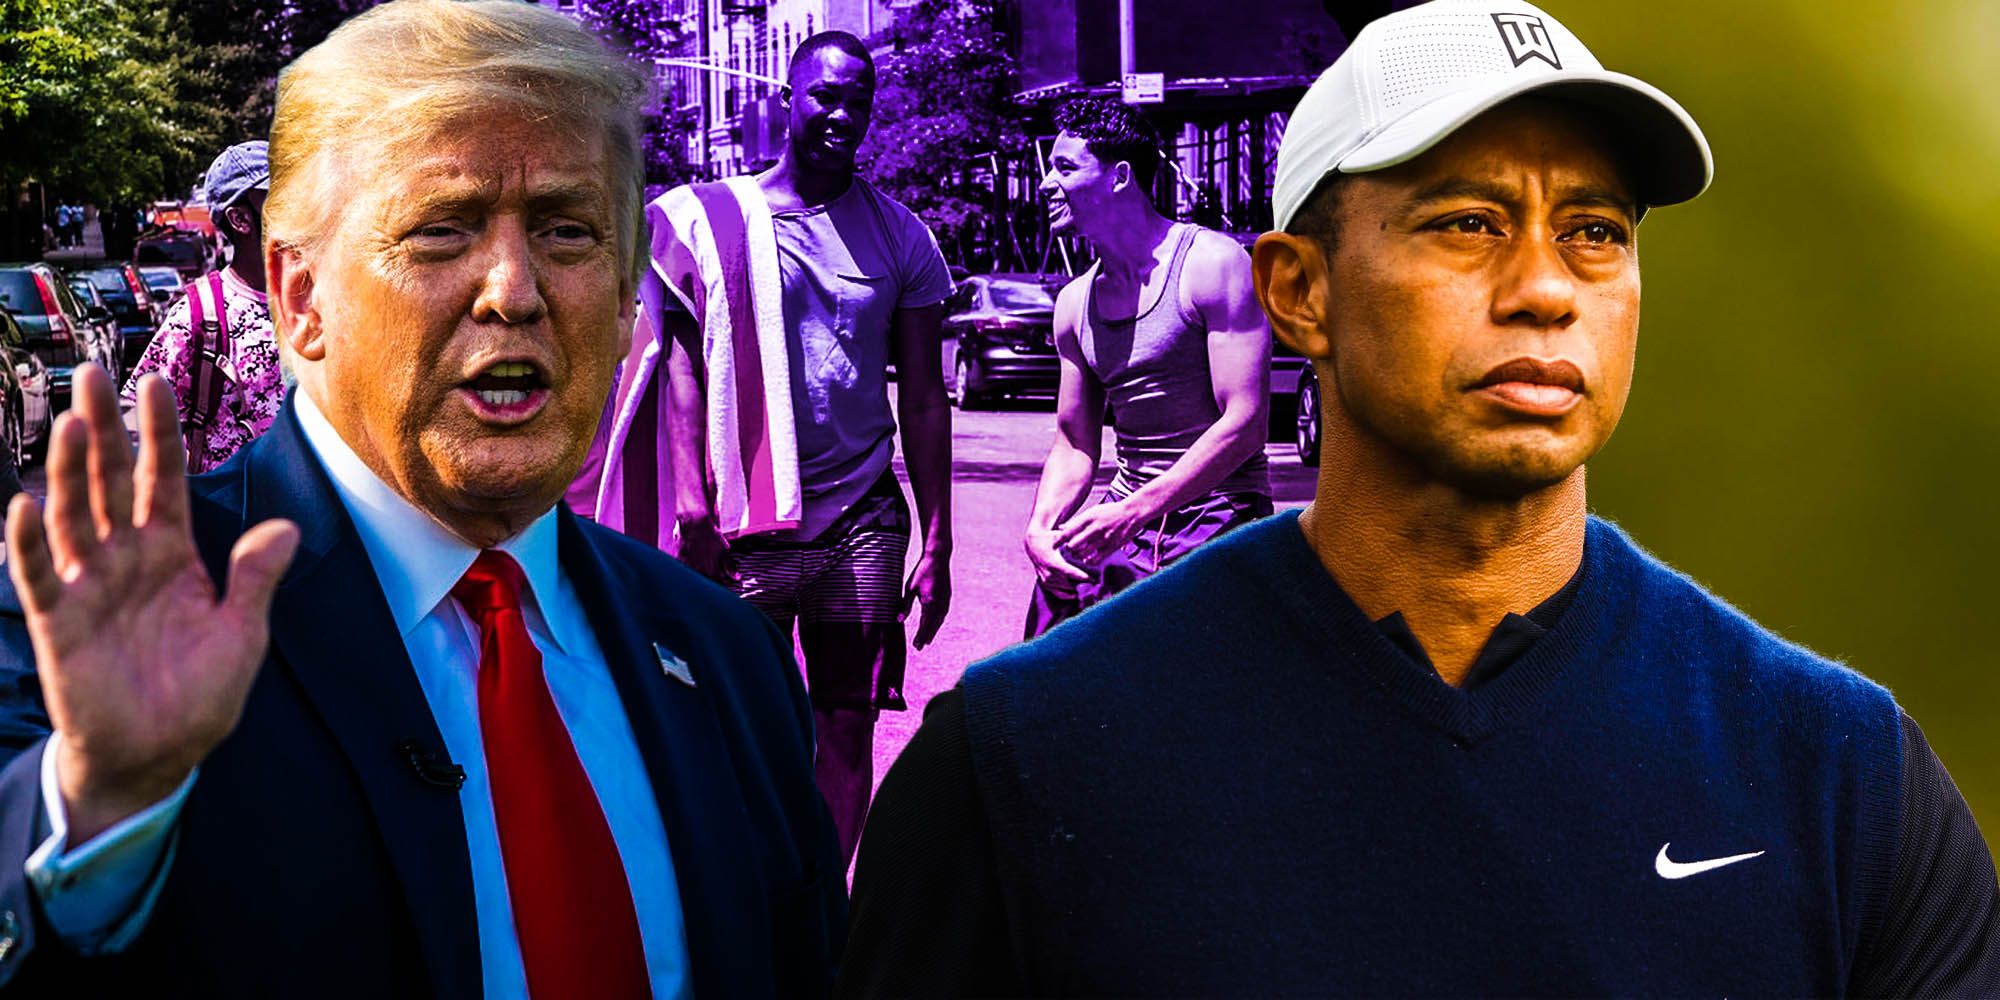 In the heights 96000 changed lyric from donald trump to Tiger woods